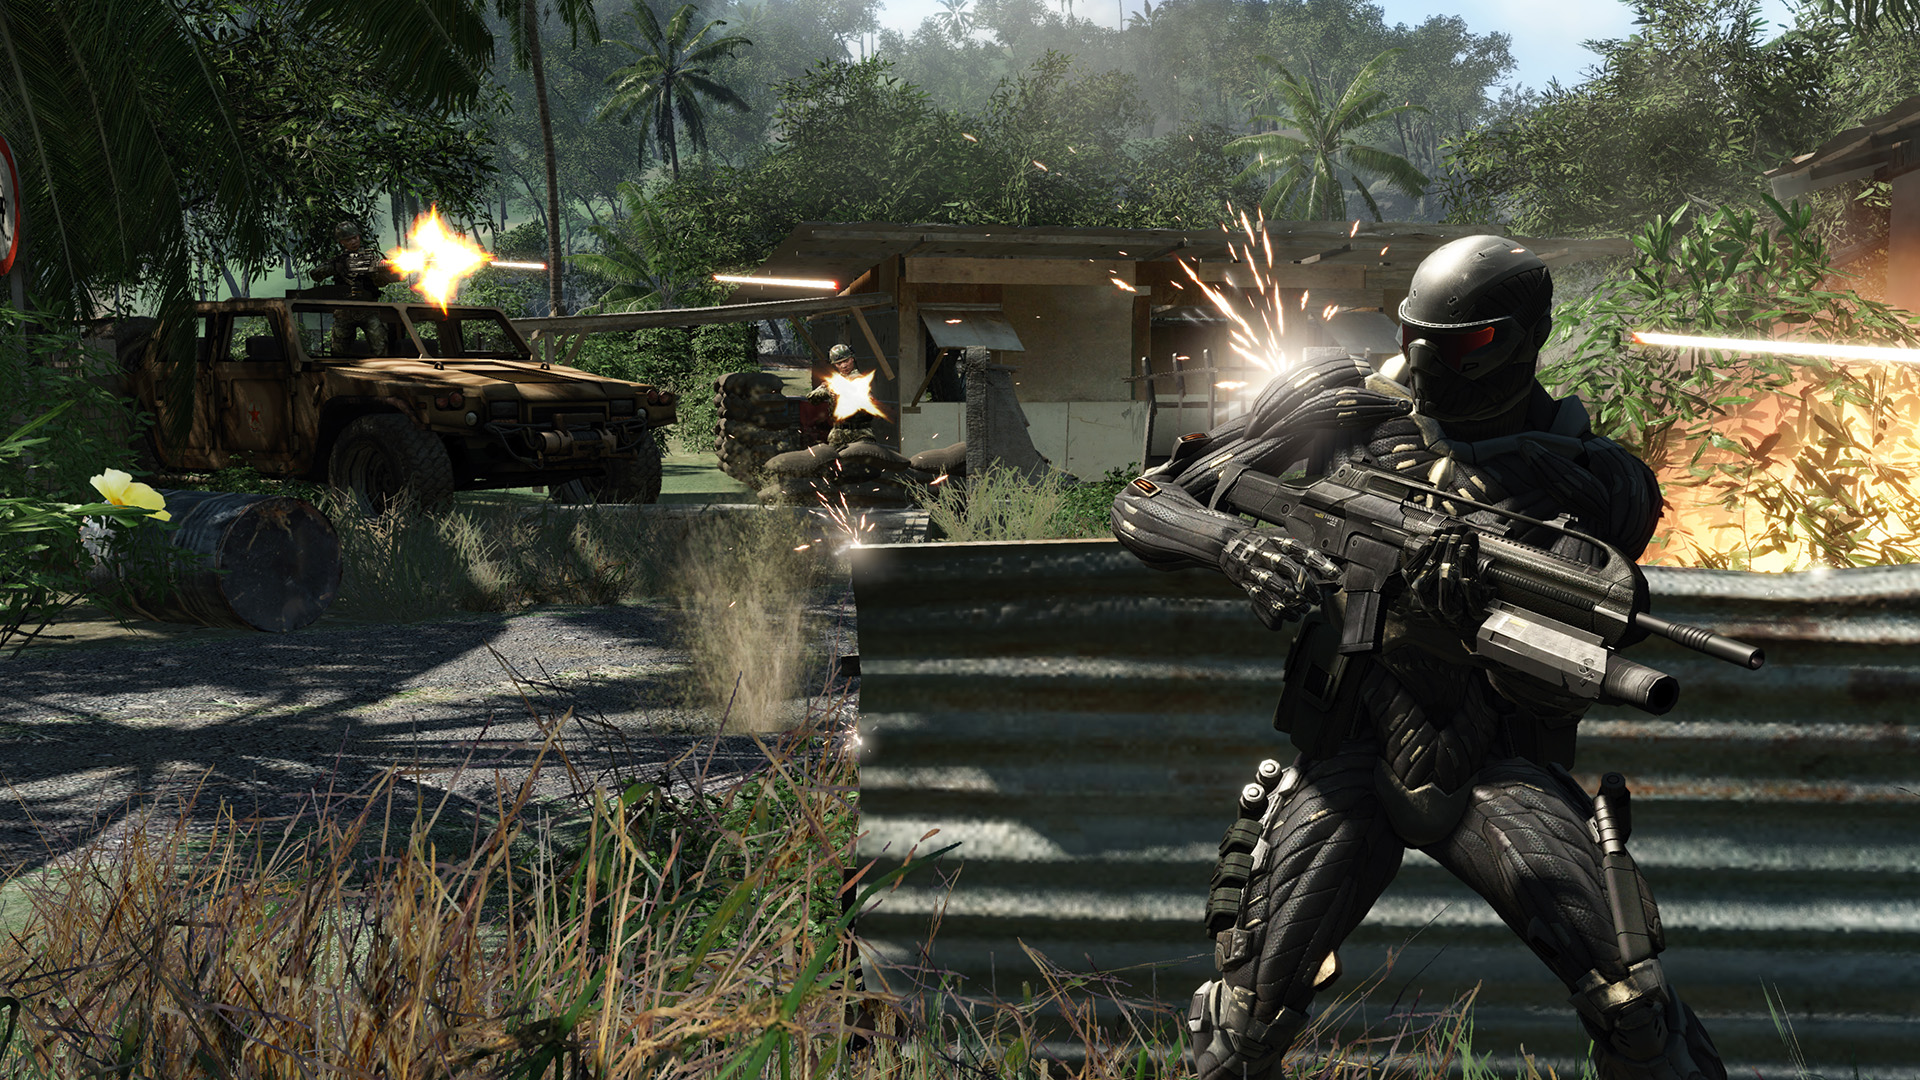  There may never be another Crysis moment for PC gaming 